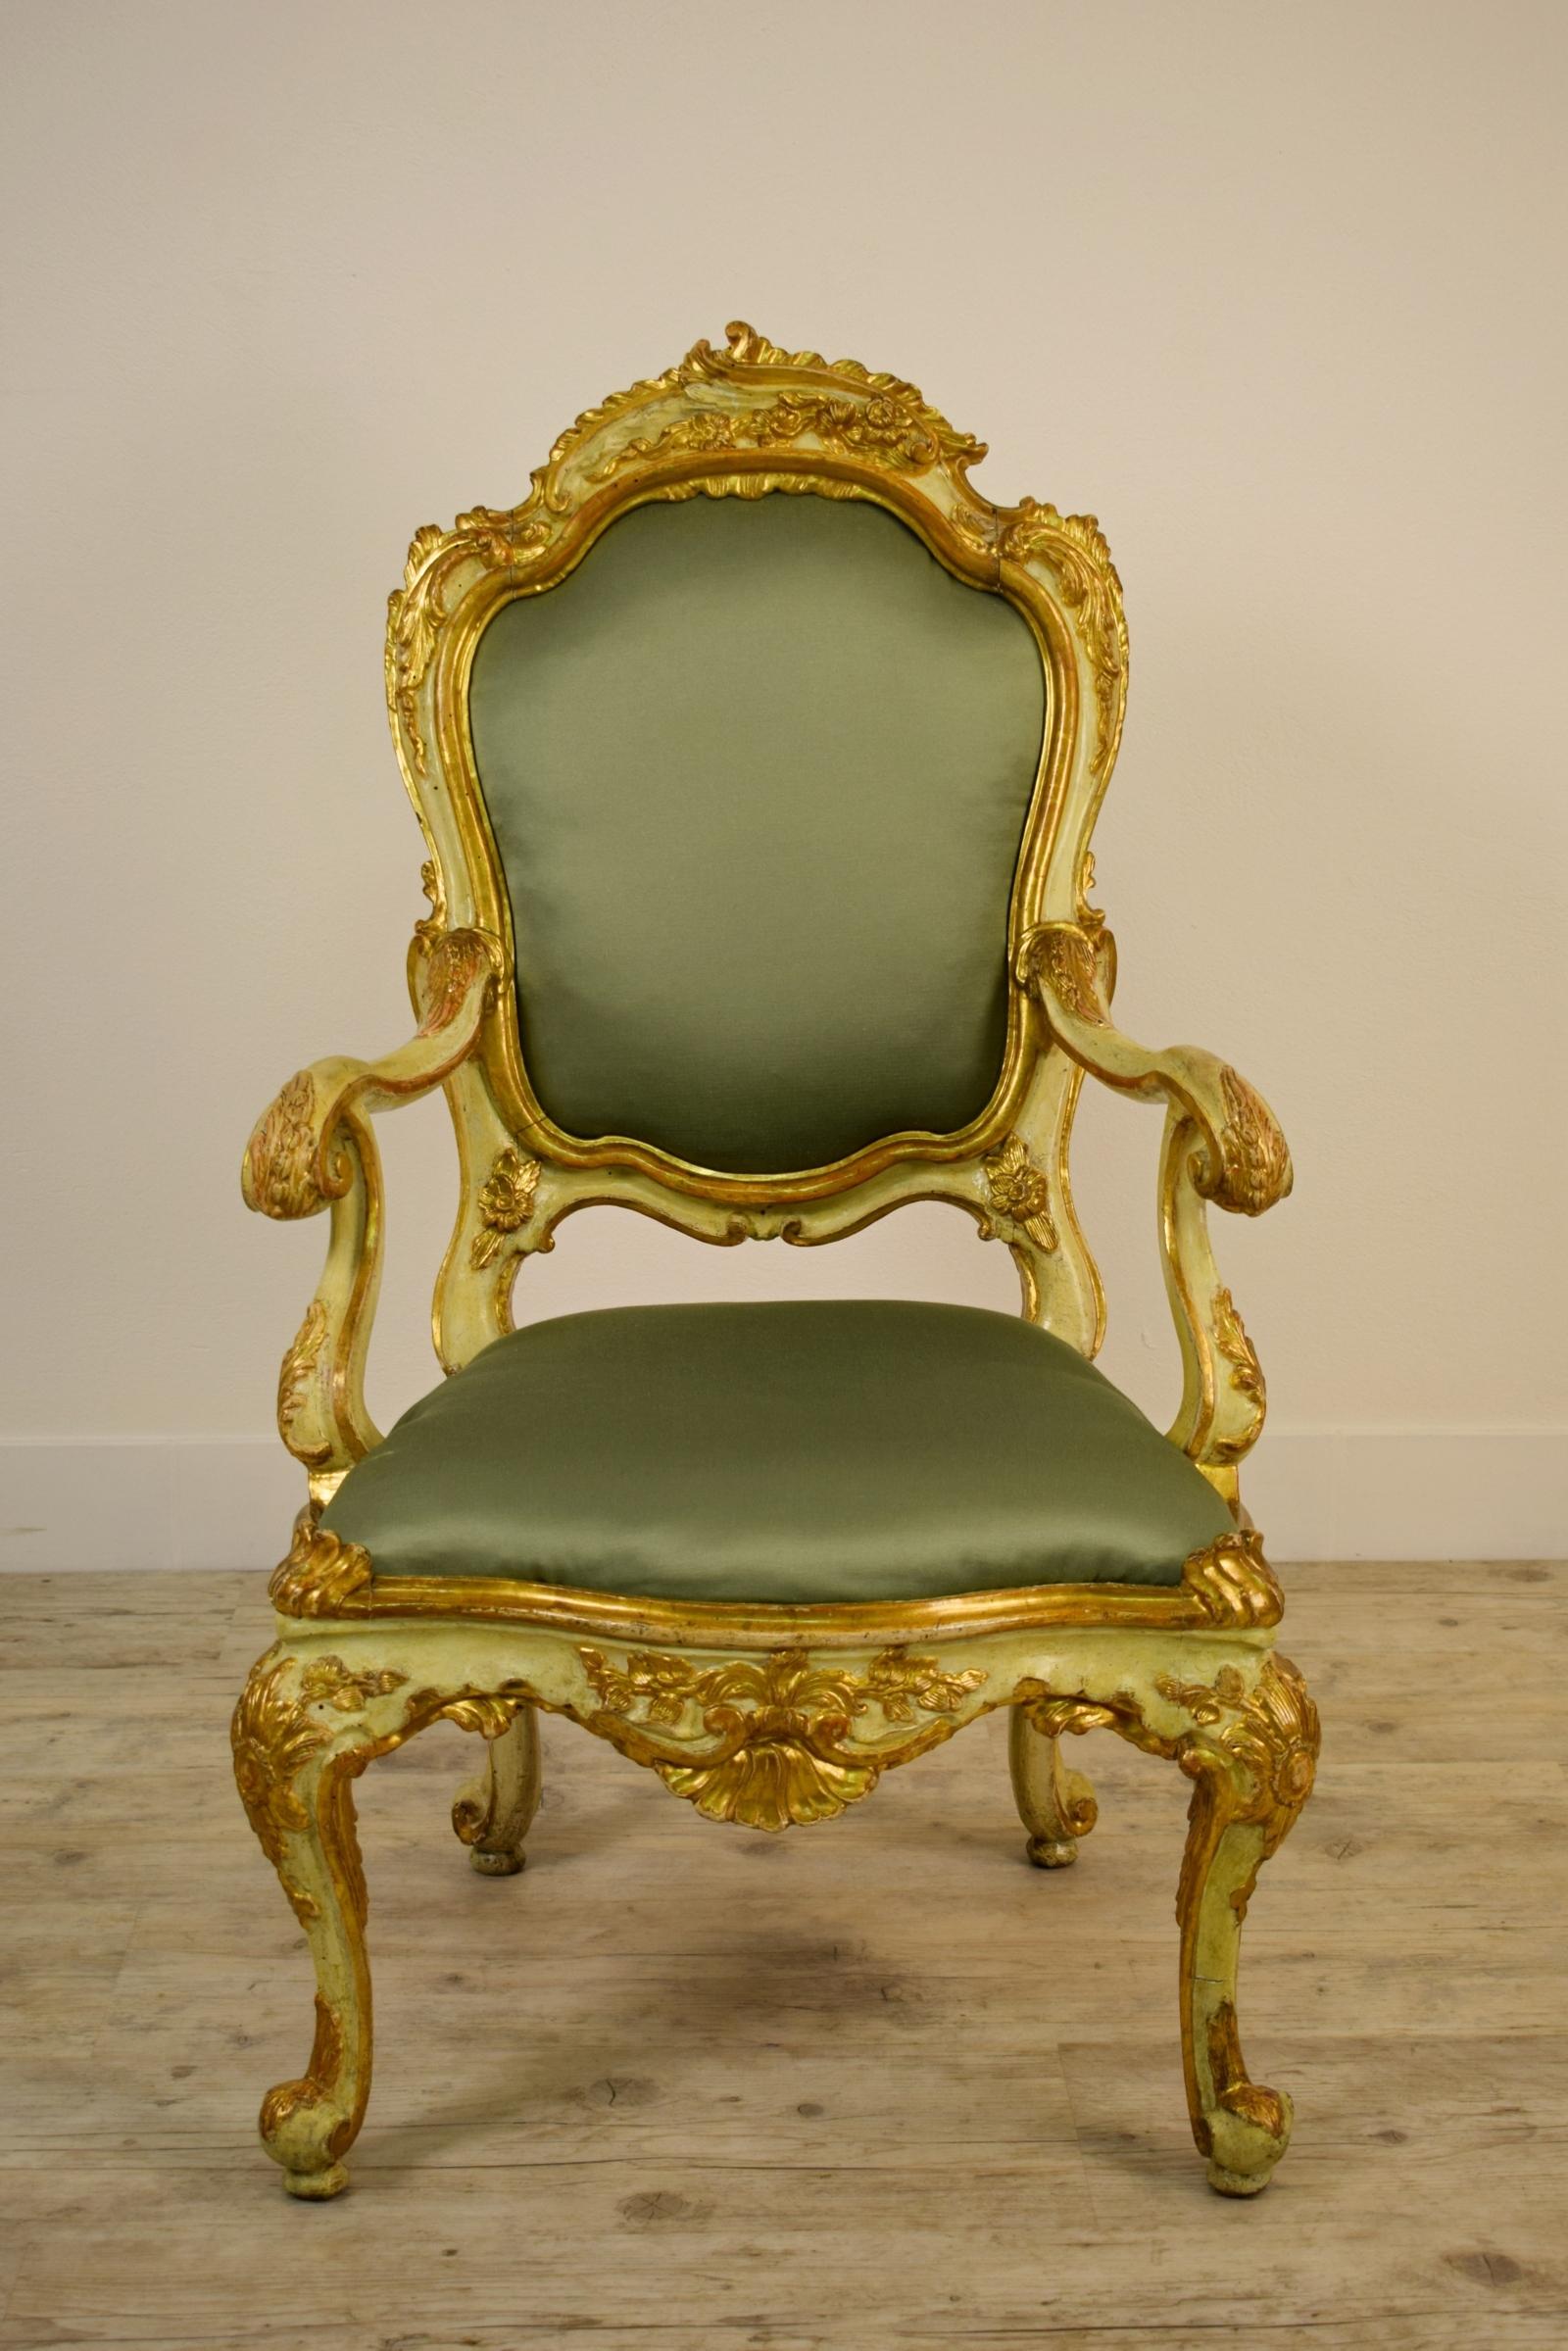 18th Century Venetian Lacquered and Gilded Wood Armchair

These beautiful armchair, in richly carved wood, was made in Veneto (Italy) in the 18th century. The fretworks with volutes and phytomorphic ornaments are beautifully gilded, on a lacquered